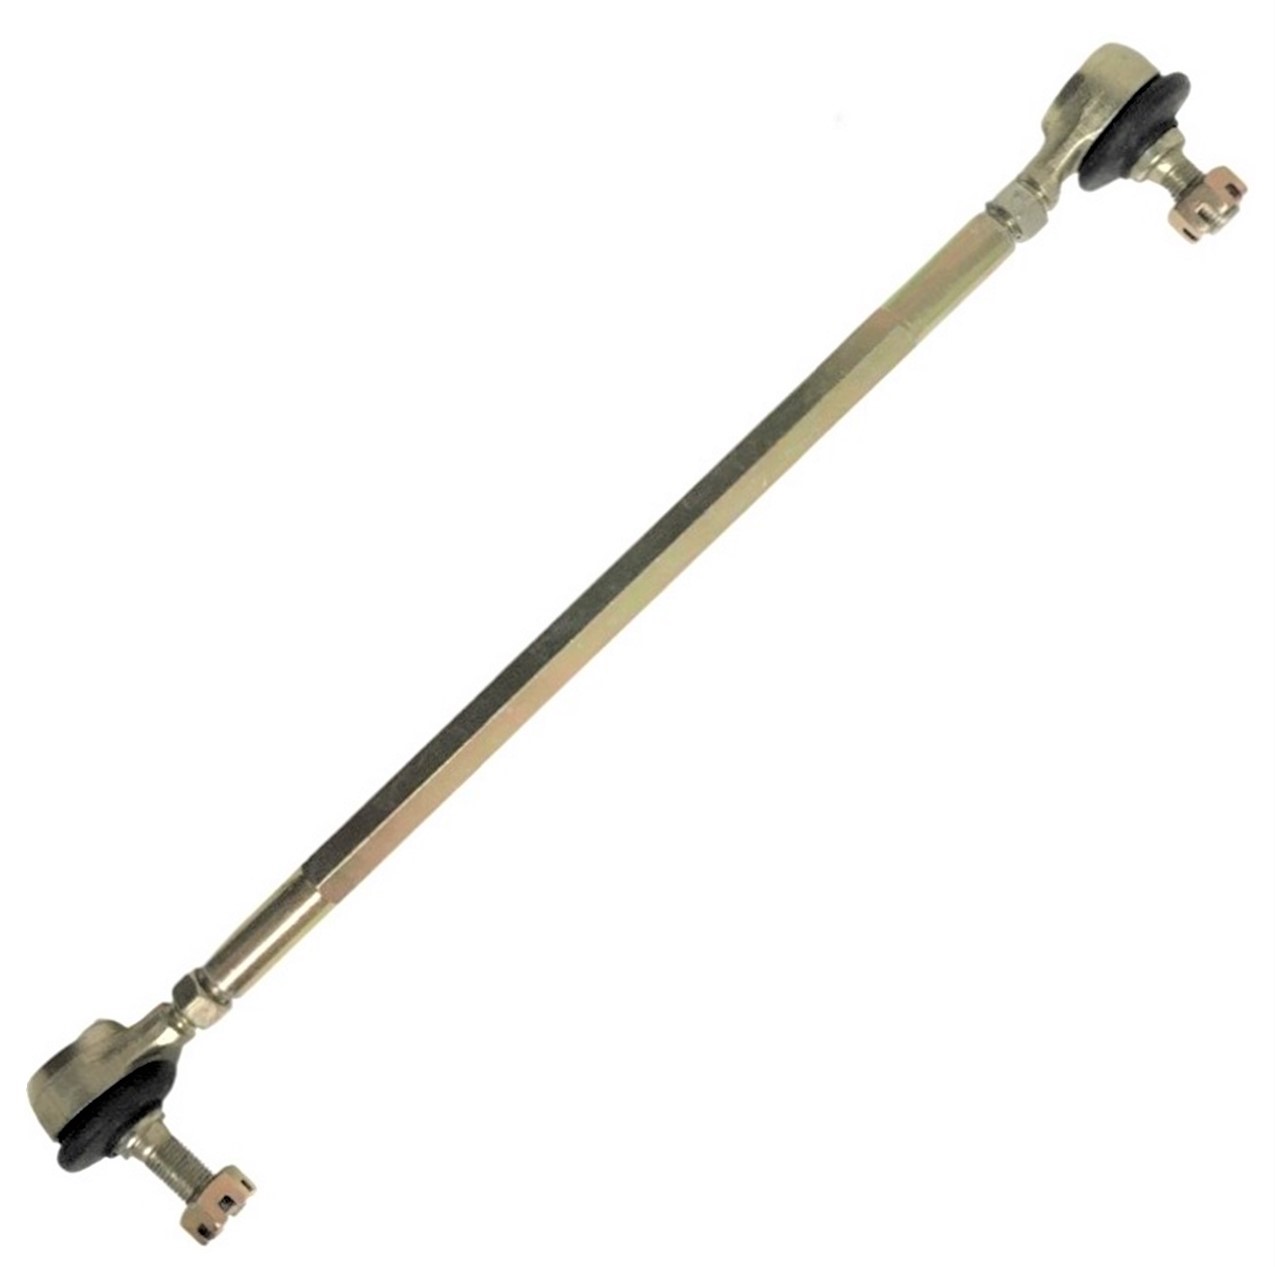 Tie-Rod Assembly Rod Threads= 10mm, Ball Joint Threads= 10mm Ball Joints Ctr-to-Ctr (min/max)= 13.50 in/14.75 in